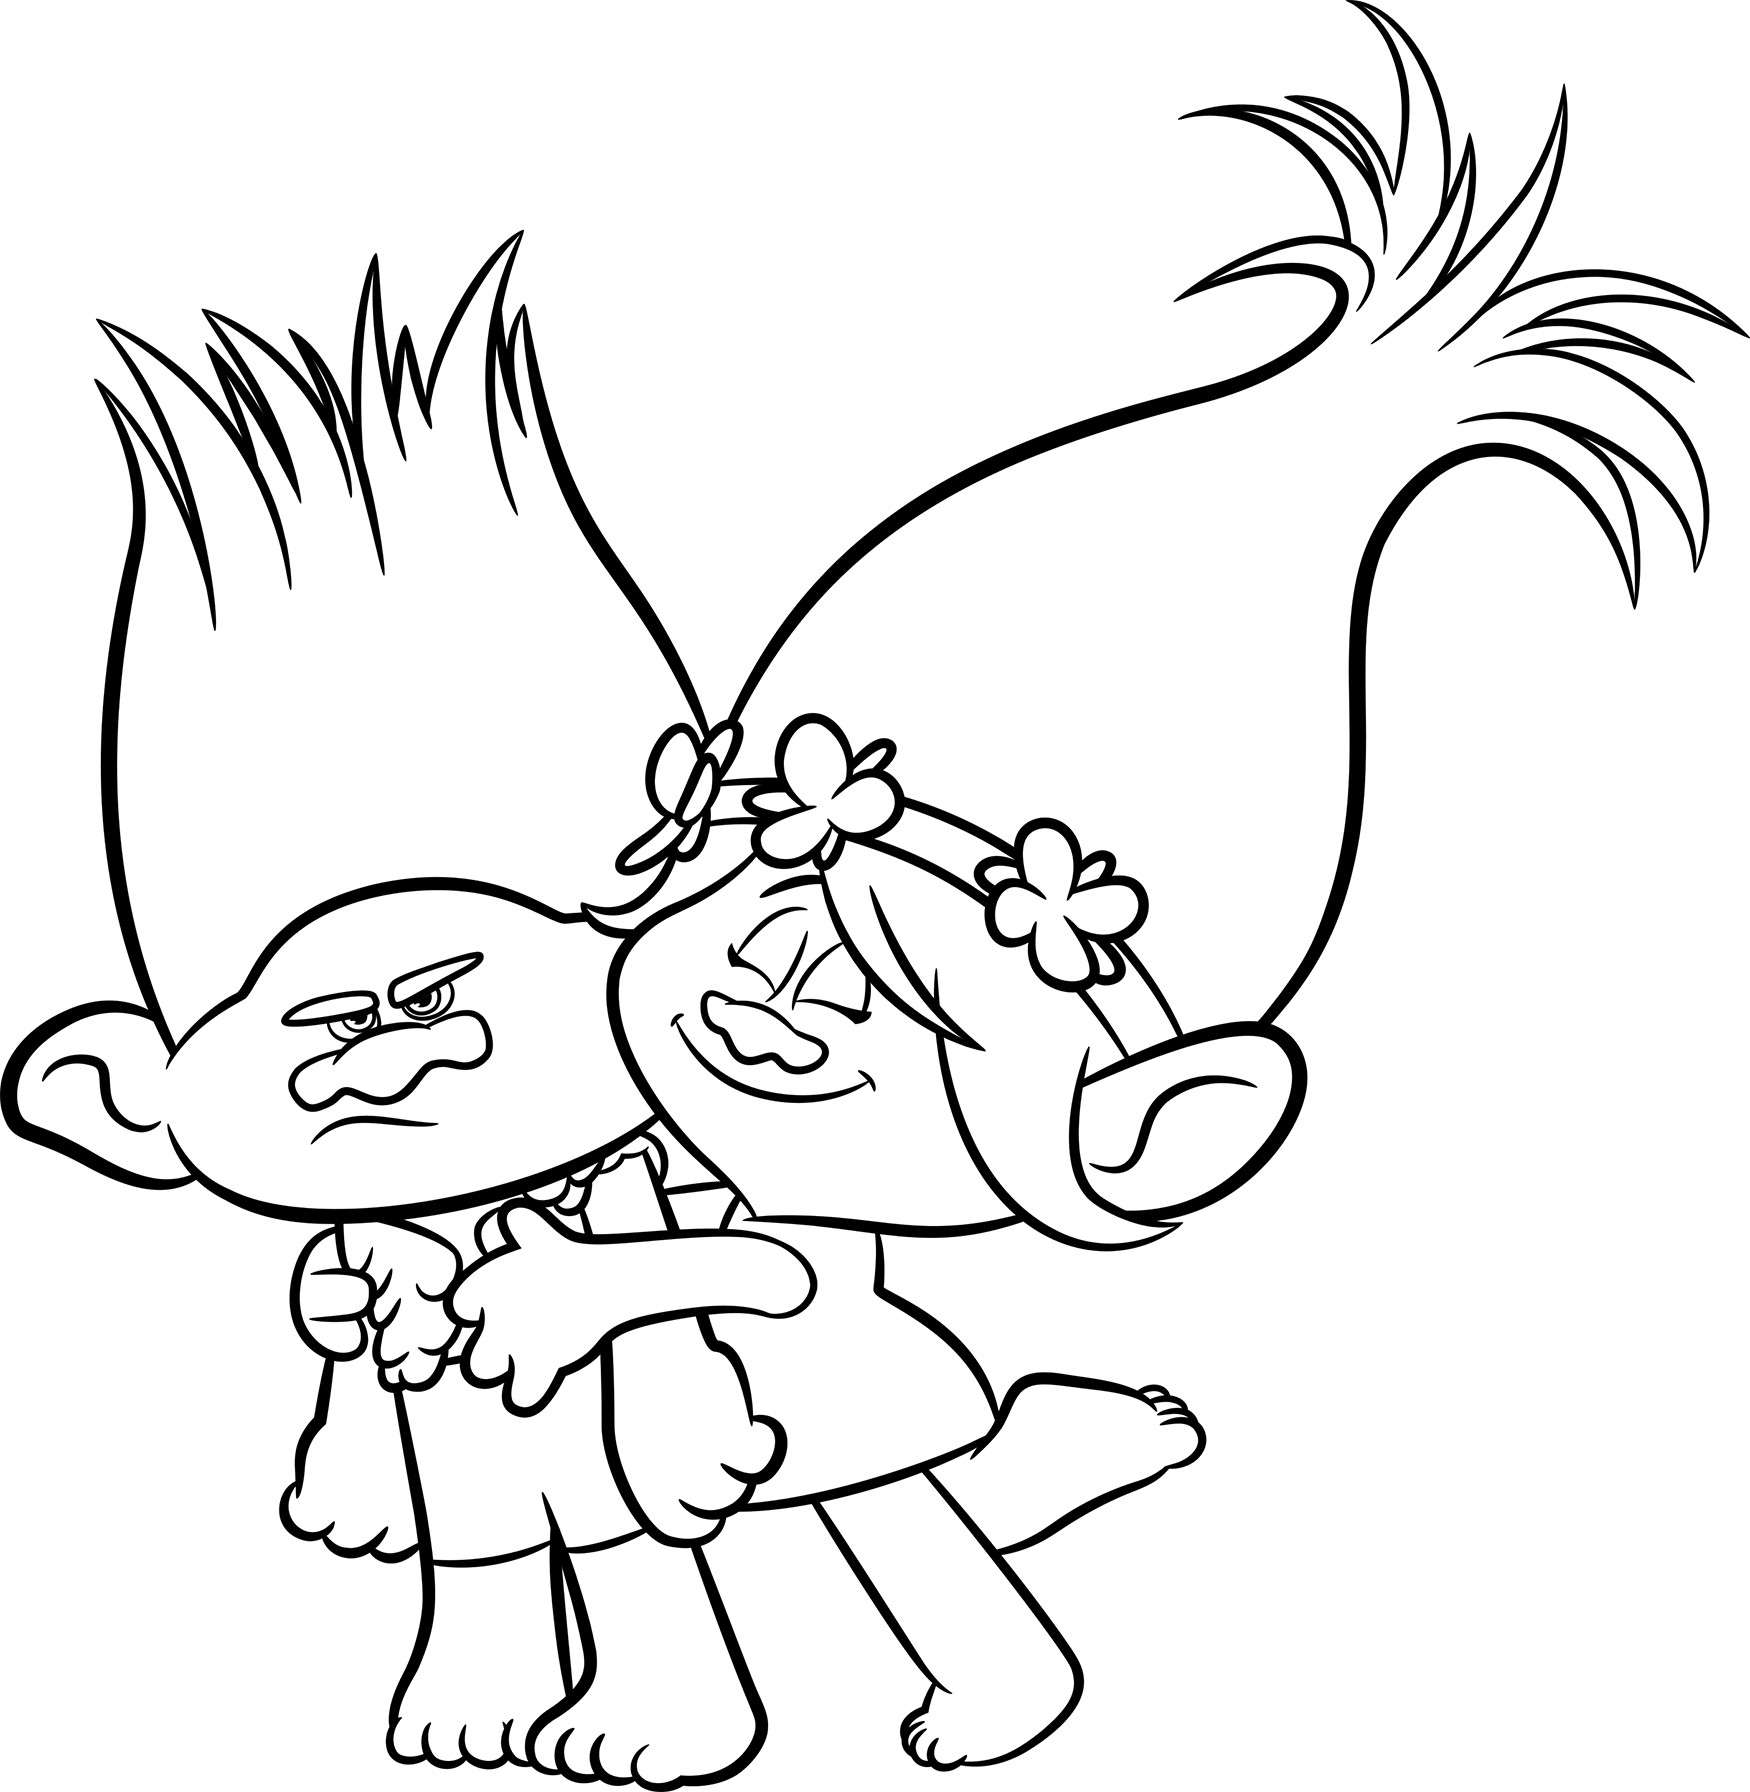 Trolls Printable Coloring Pages
 WSS Family Trolls Review and Free Printables Woman of